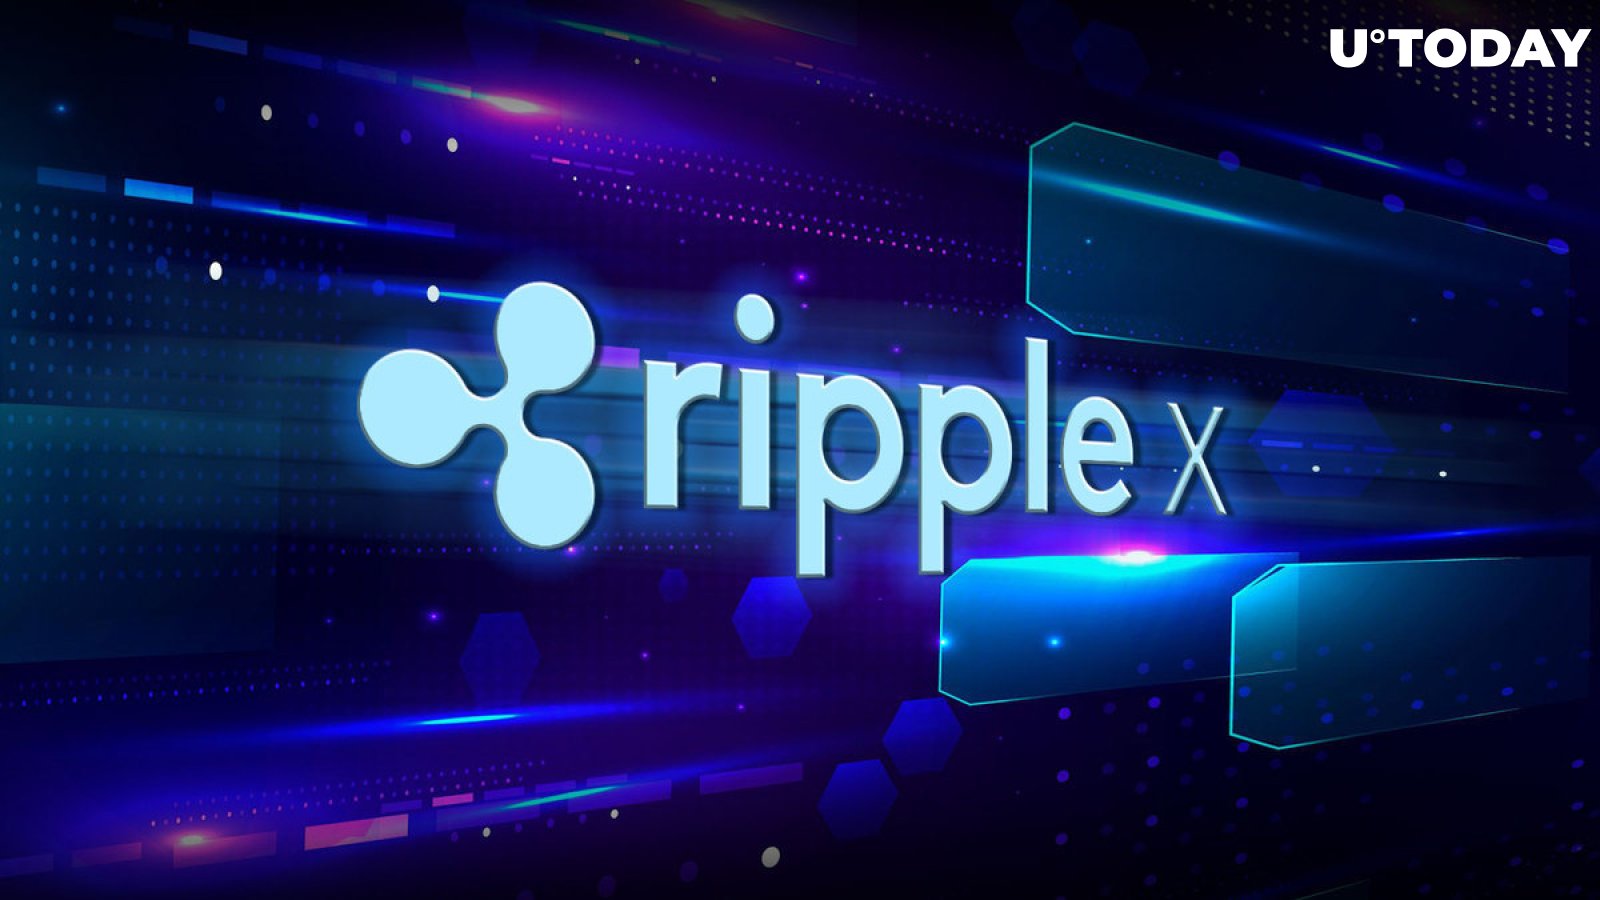 RippleX Releases Funds to Developers: Details